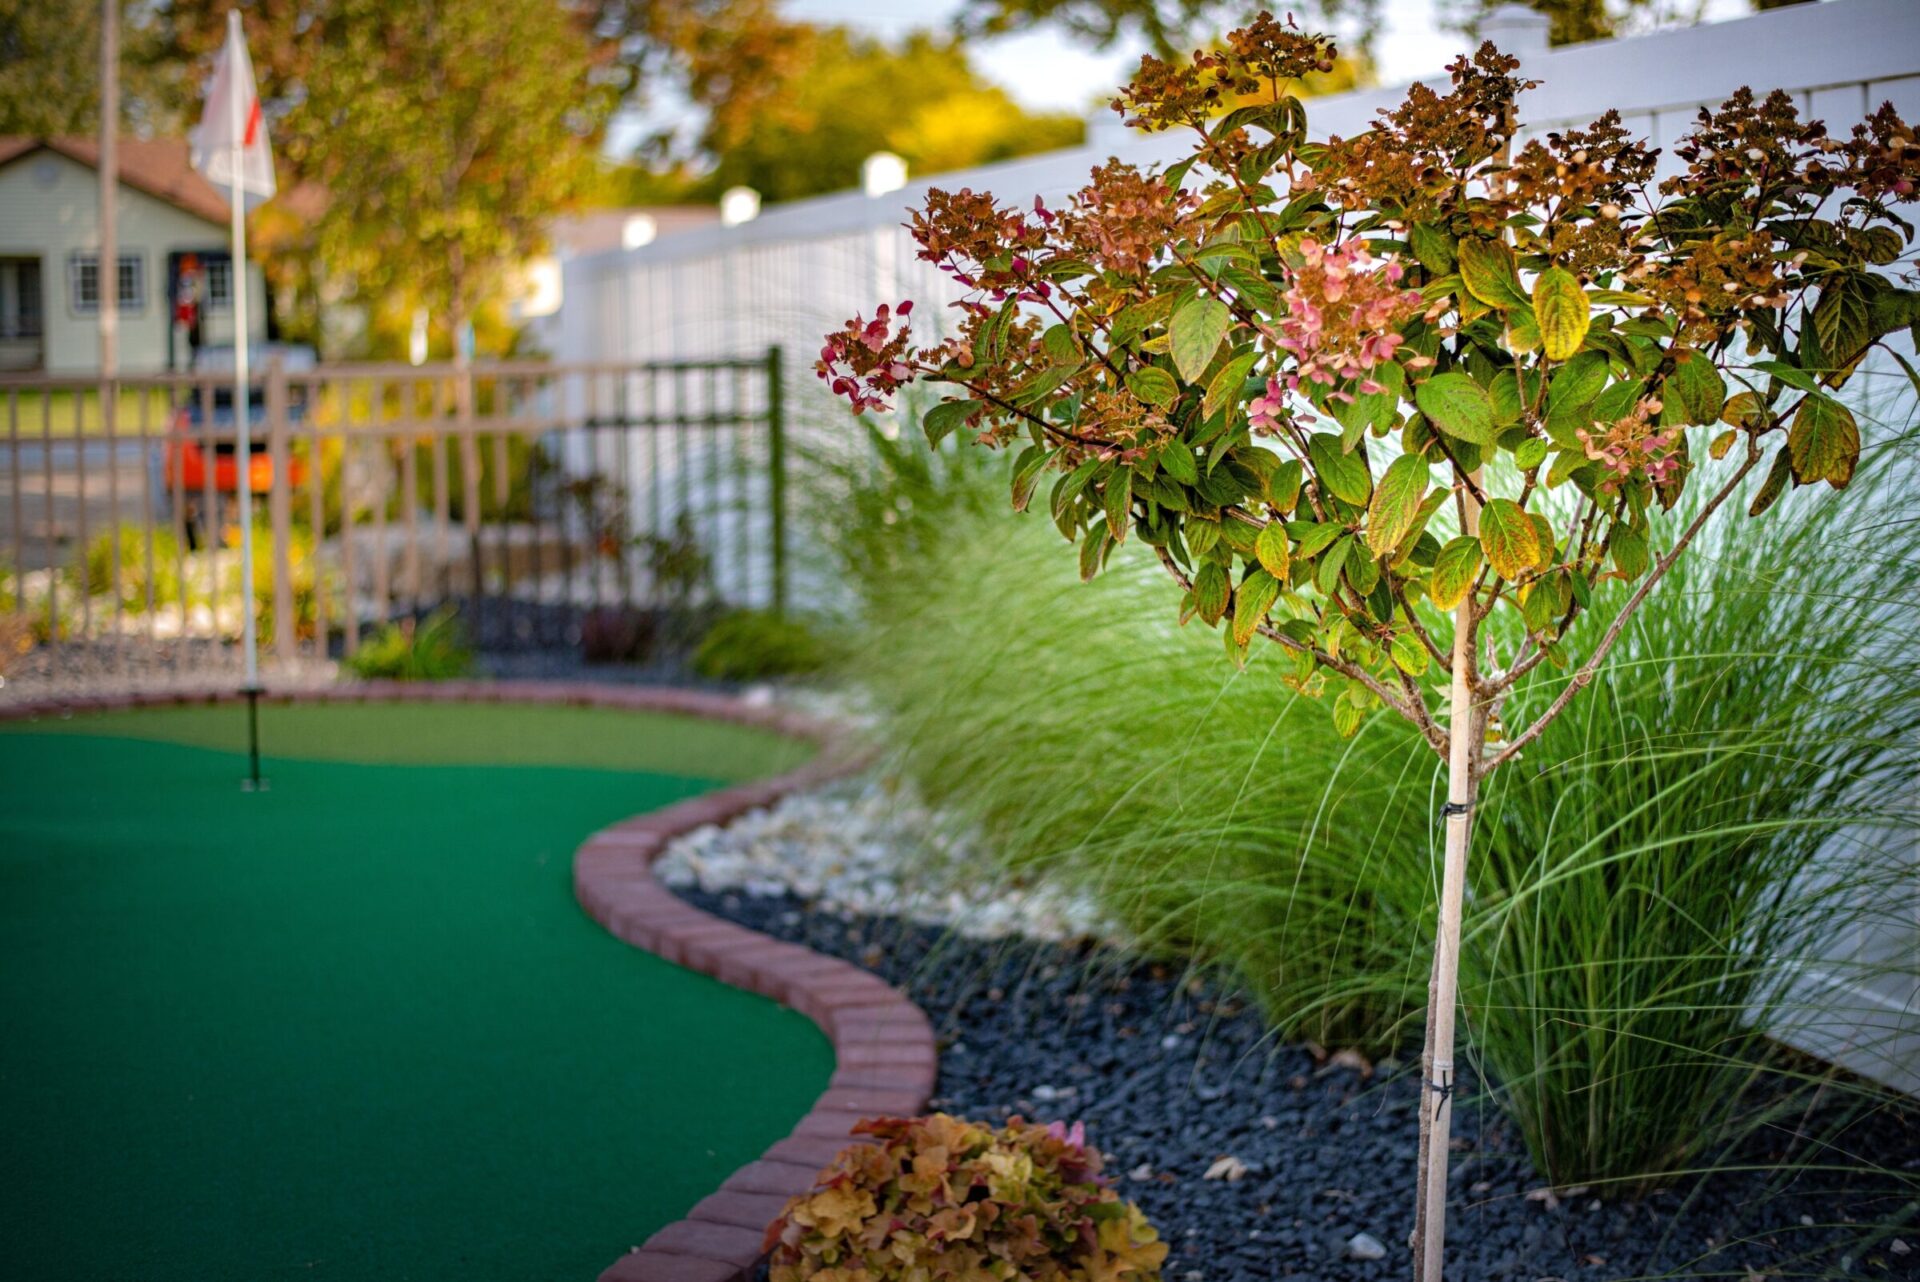 A small tree with reddish leaves stands in focus in the foreground of a miniature golf course with a curved path, white rocks, and lush grasses.